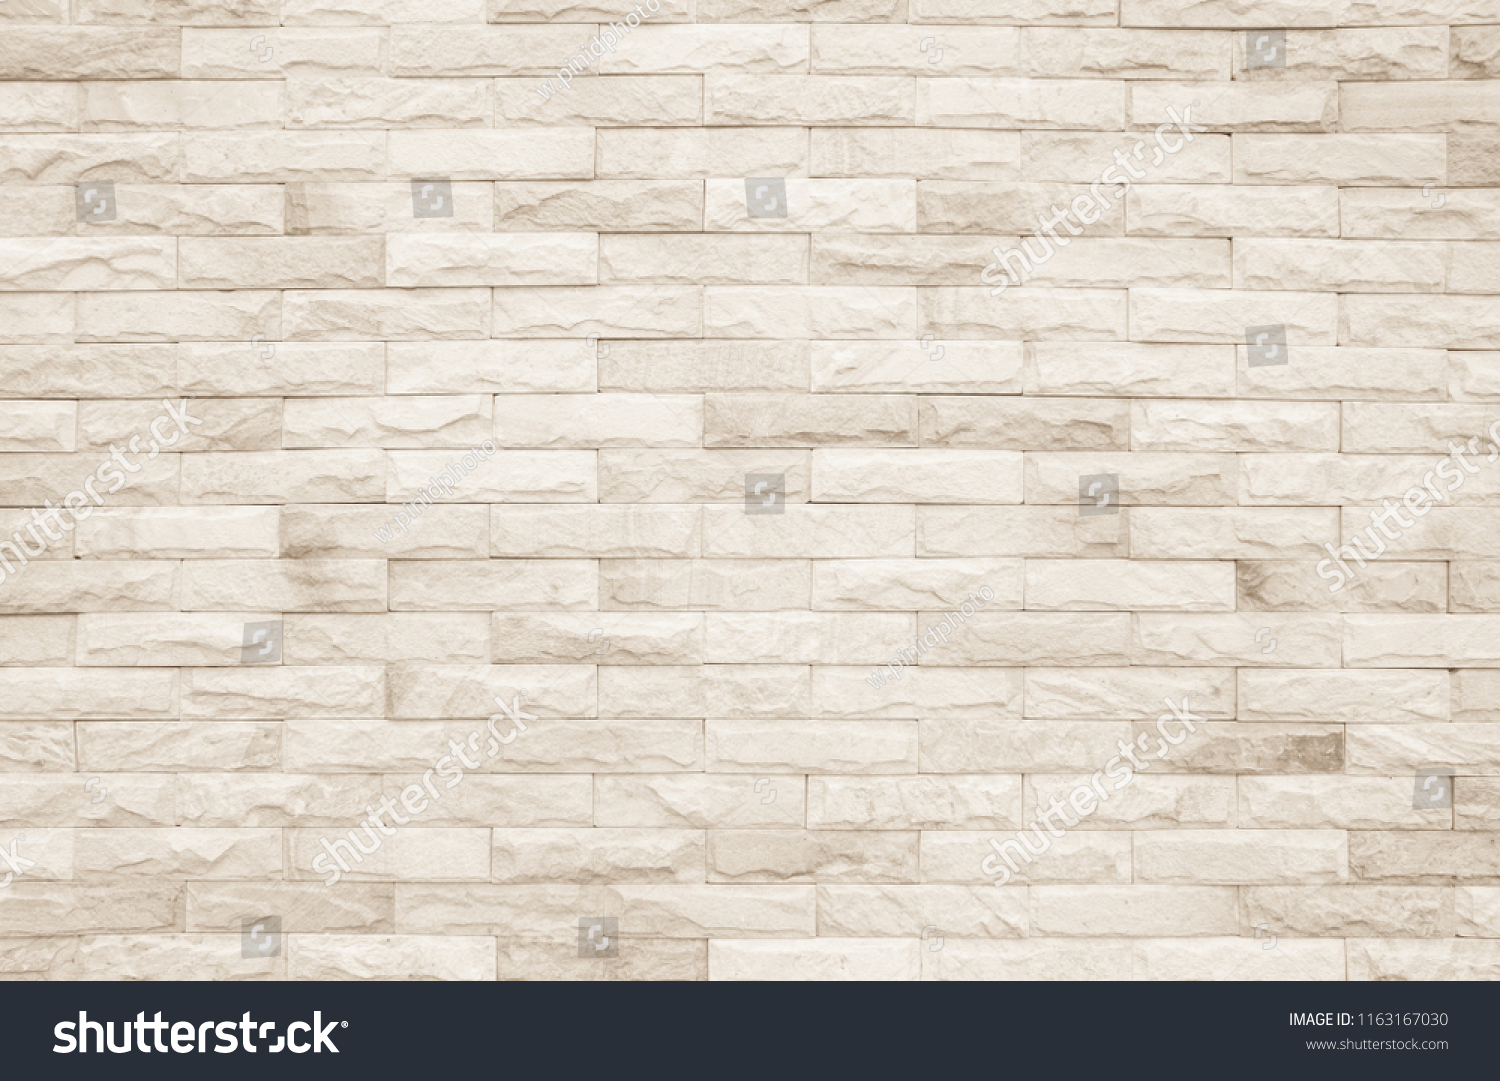 Cream and white brick wall texture background. Brickwork and stonework flooring backdrop interior design home style vintage old pattern clean with concrete uneven color beige bricks stack decoration. #1163167030